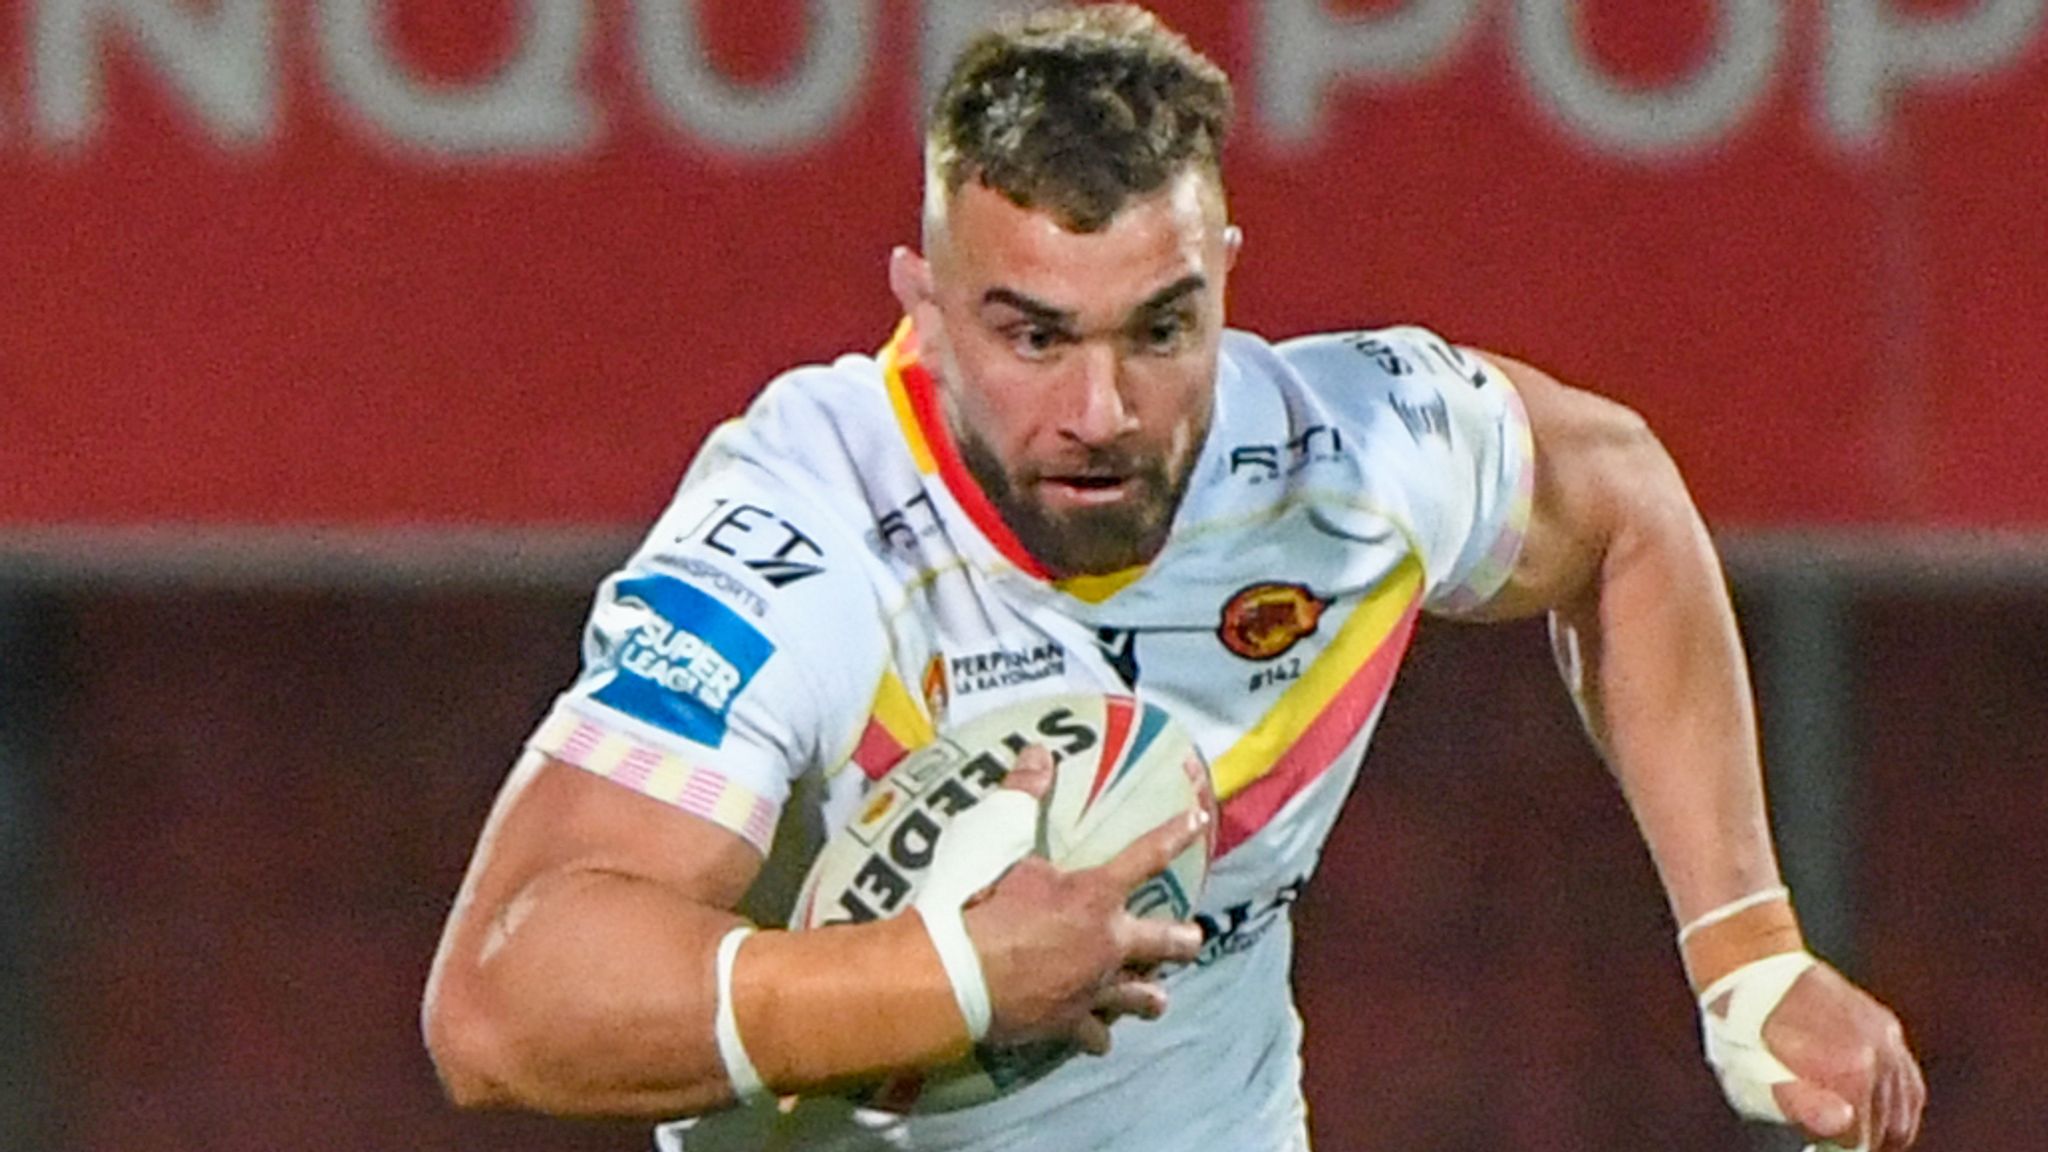 Catalans Dragons 22-18 Castleford Mike McMeeken scores late try as Dragons snatch win Rugby League News Sky Sports